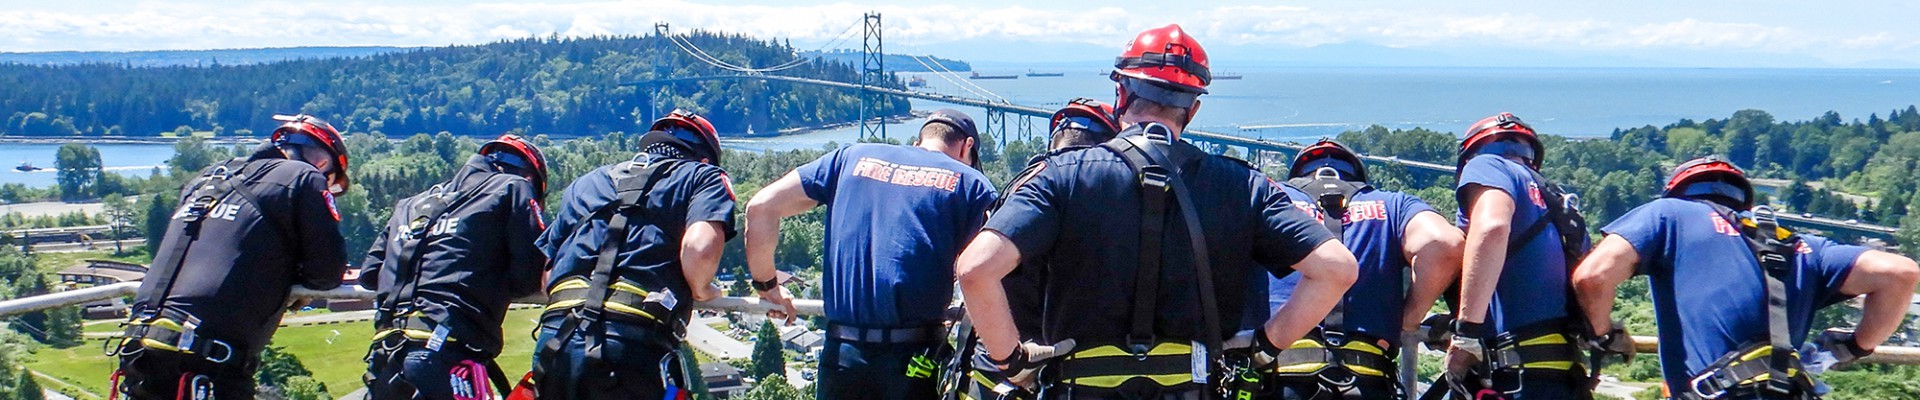 A group of firefighters clad in blue uniforms look over the edge of a tall building.